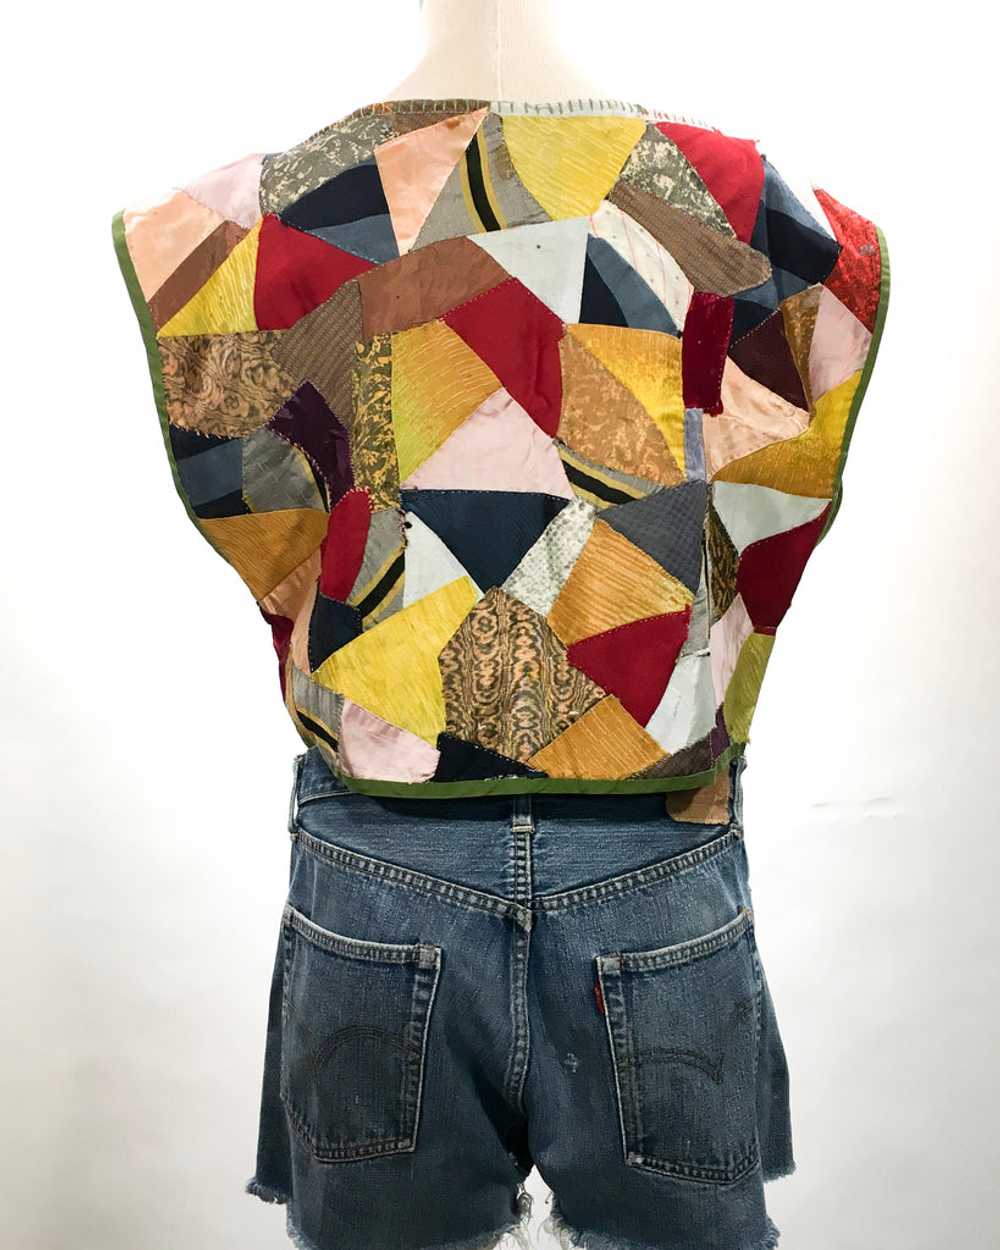 Handmade Crop Top from 1940s Quilt - image 2